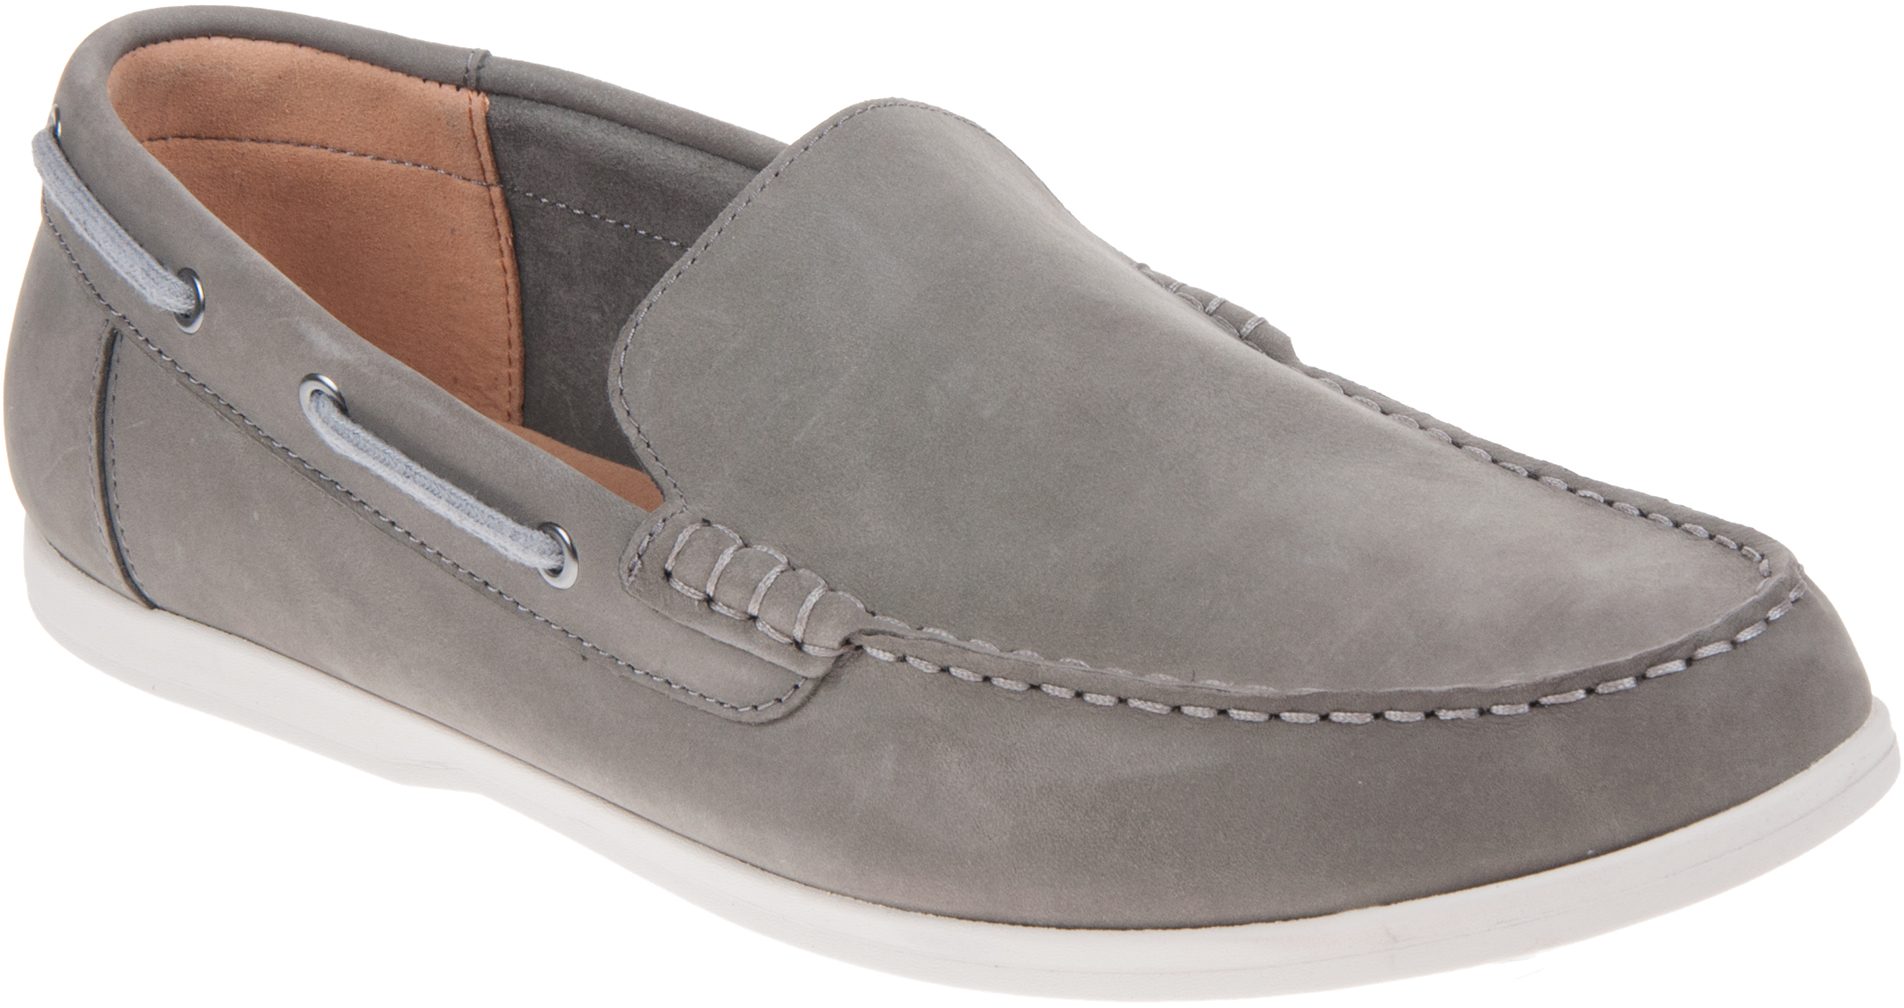 Exercise palm all the best Clarks Morven Sun Dark Grey Nubuck 26132467 - Casual Shoes - Humphries Shoes